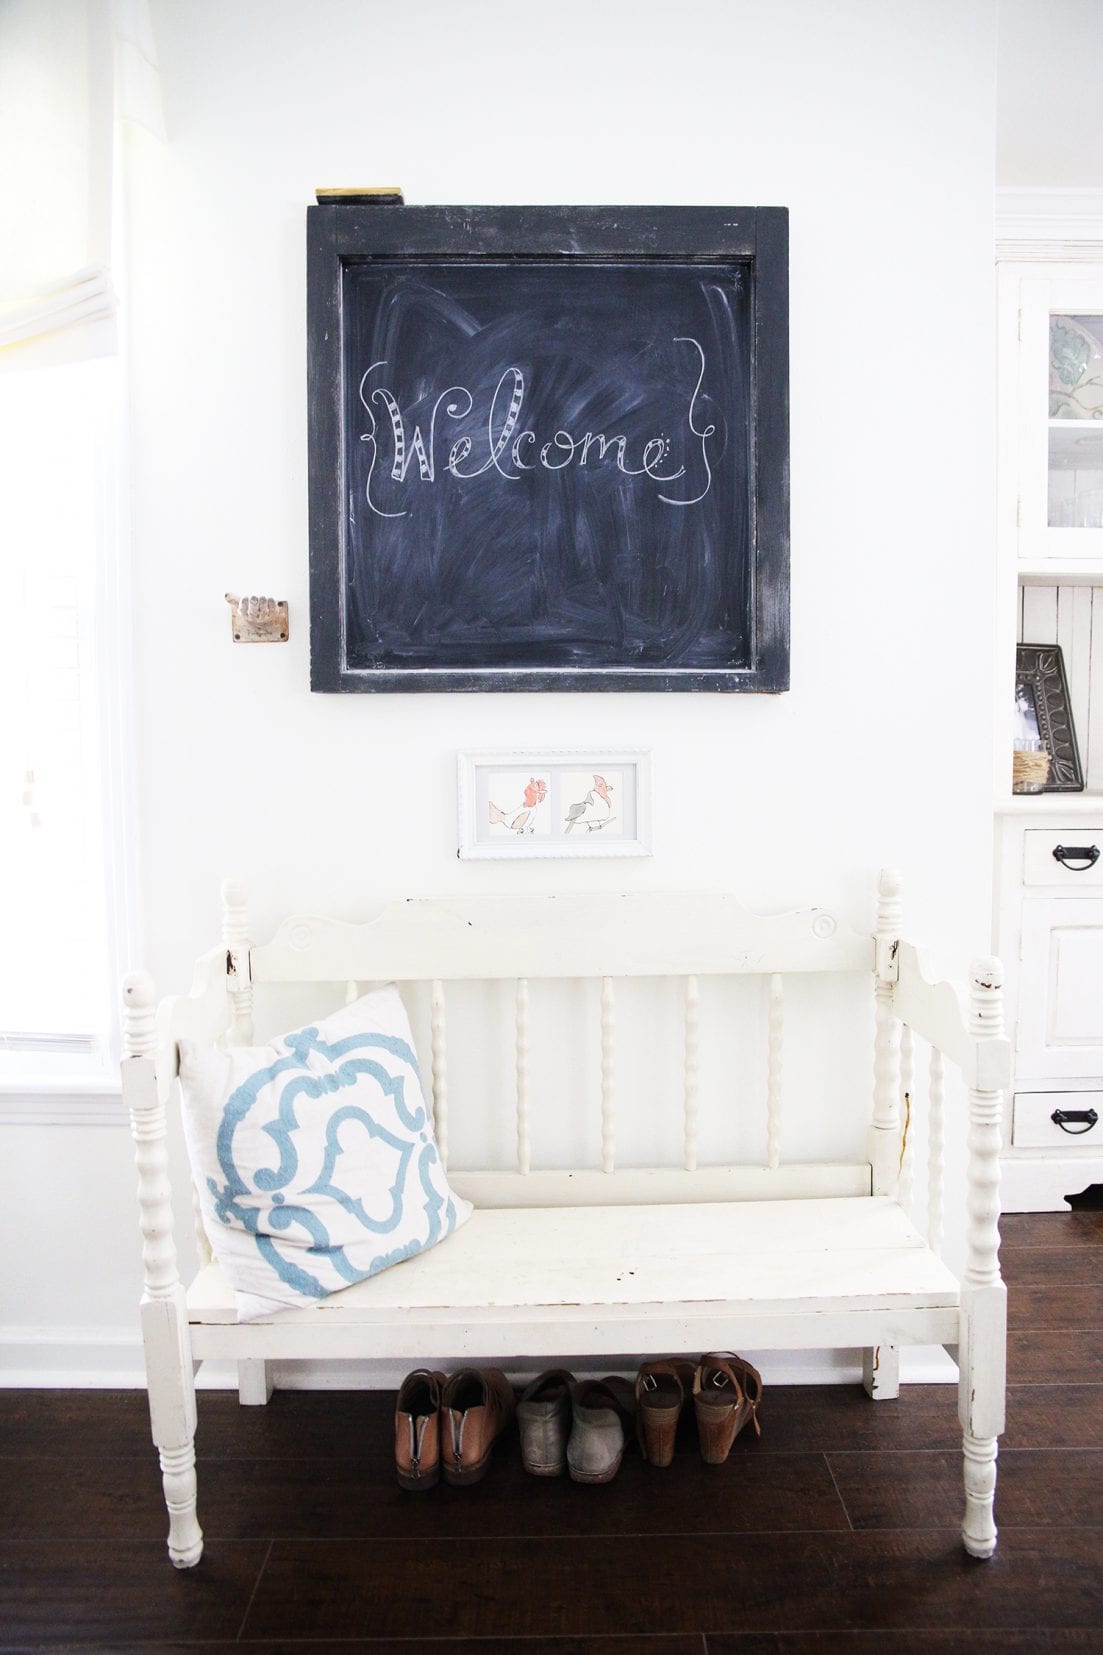 10 foolproof decorating tips - signs